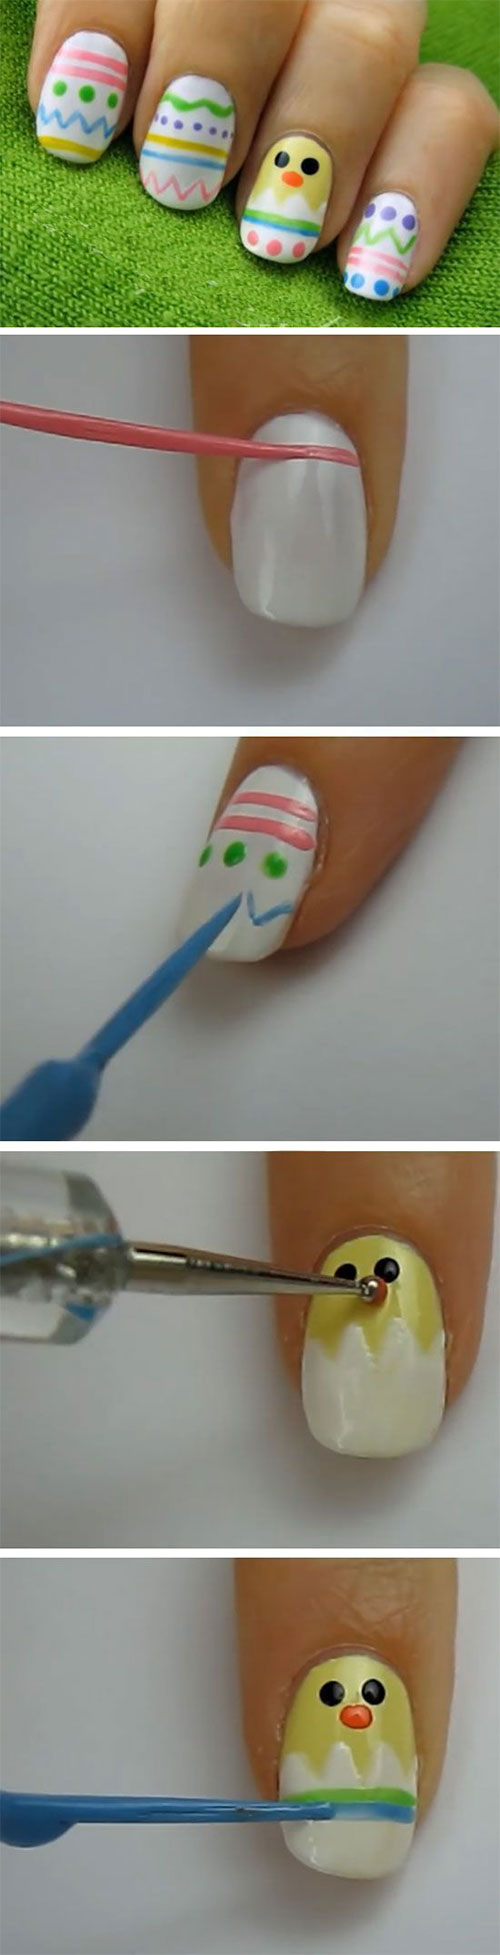 12-Easter-Nail-Art-Tutorials-For-Beginners-Learners-2017-8